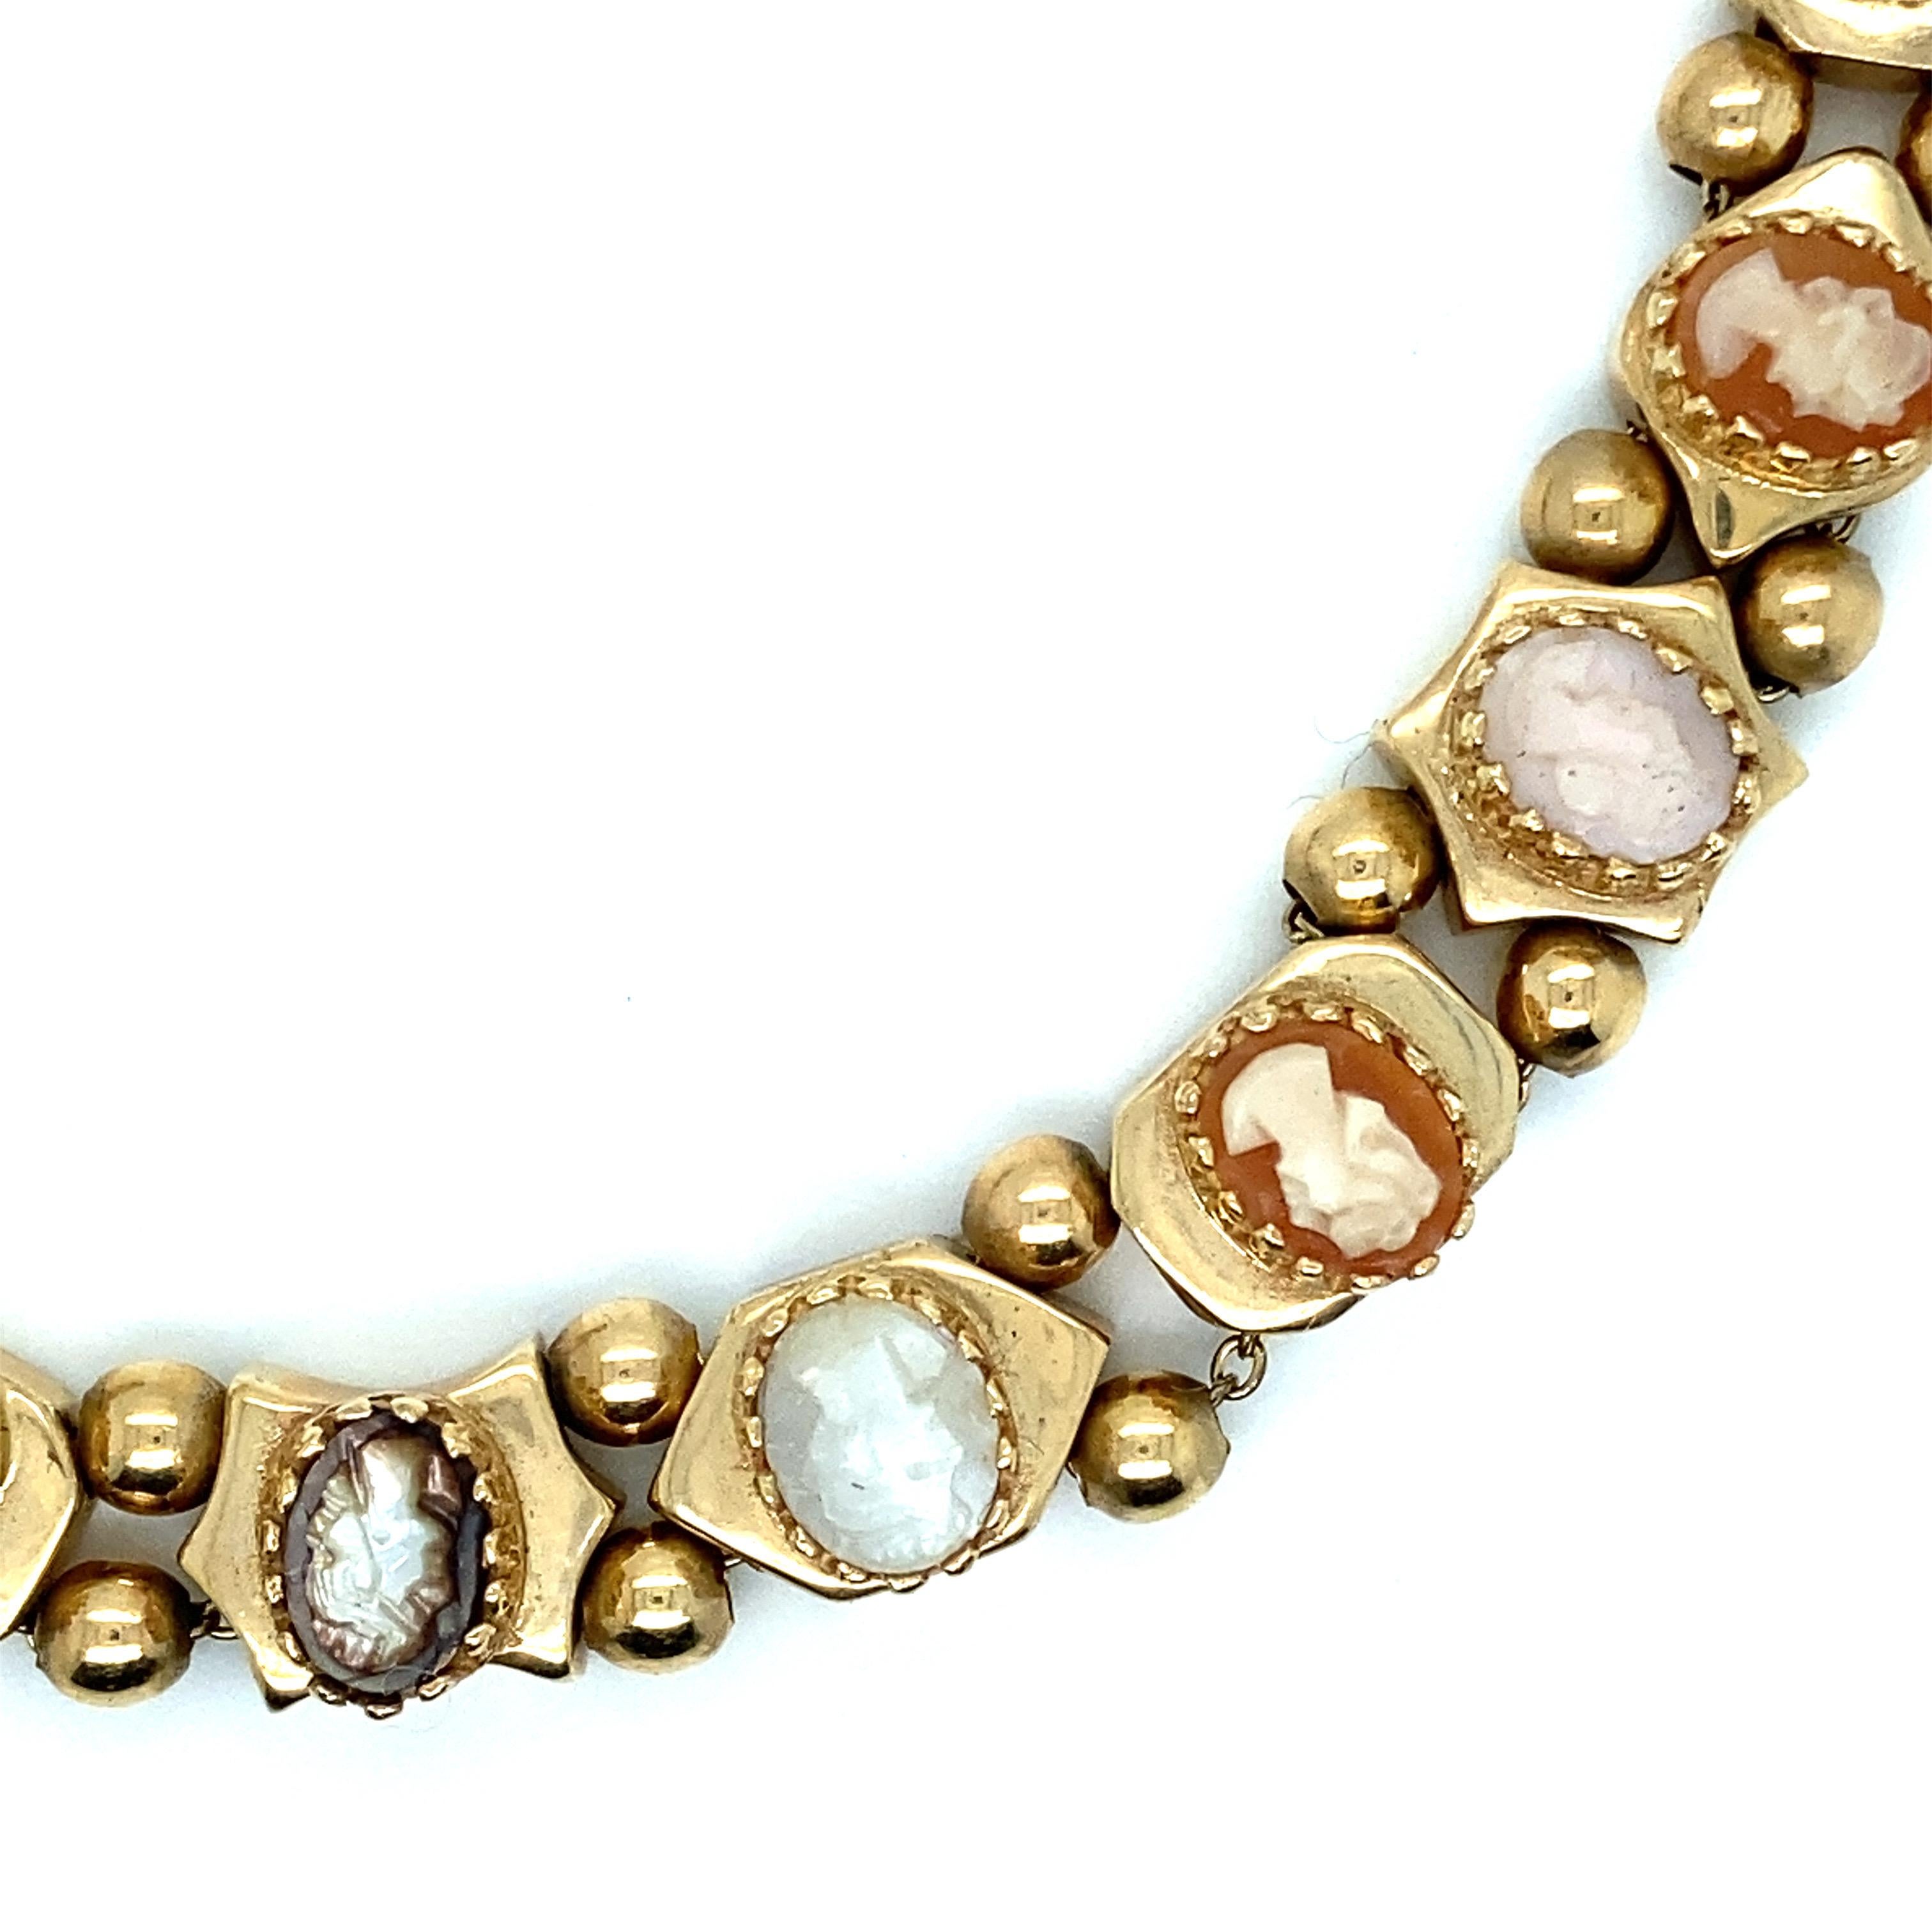 Vintage 14K Yellow Gold Cameo Slide Charm Bracelet - The bracelet is made with 12 Cameo slides with mixed color shells. The slides are separated by gold bead dividers. The length of the bracelet is 6 1/2